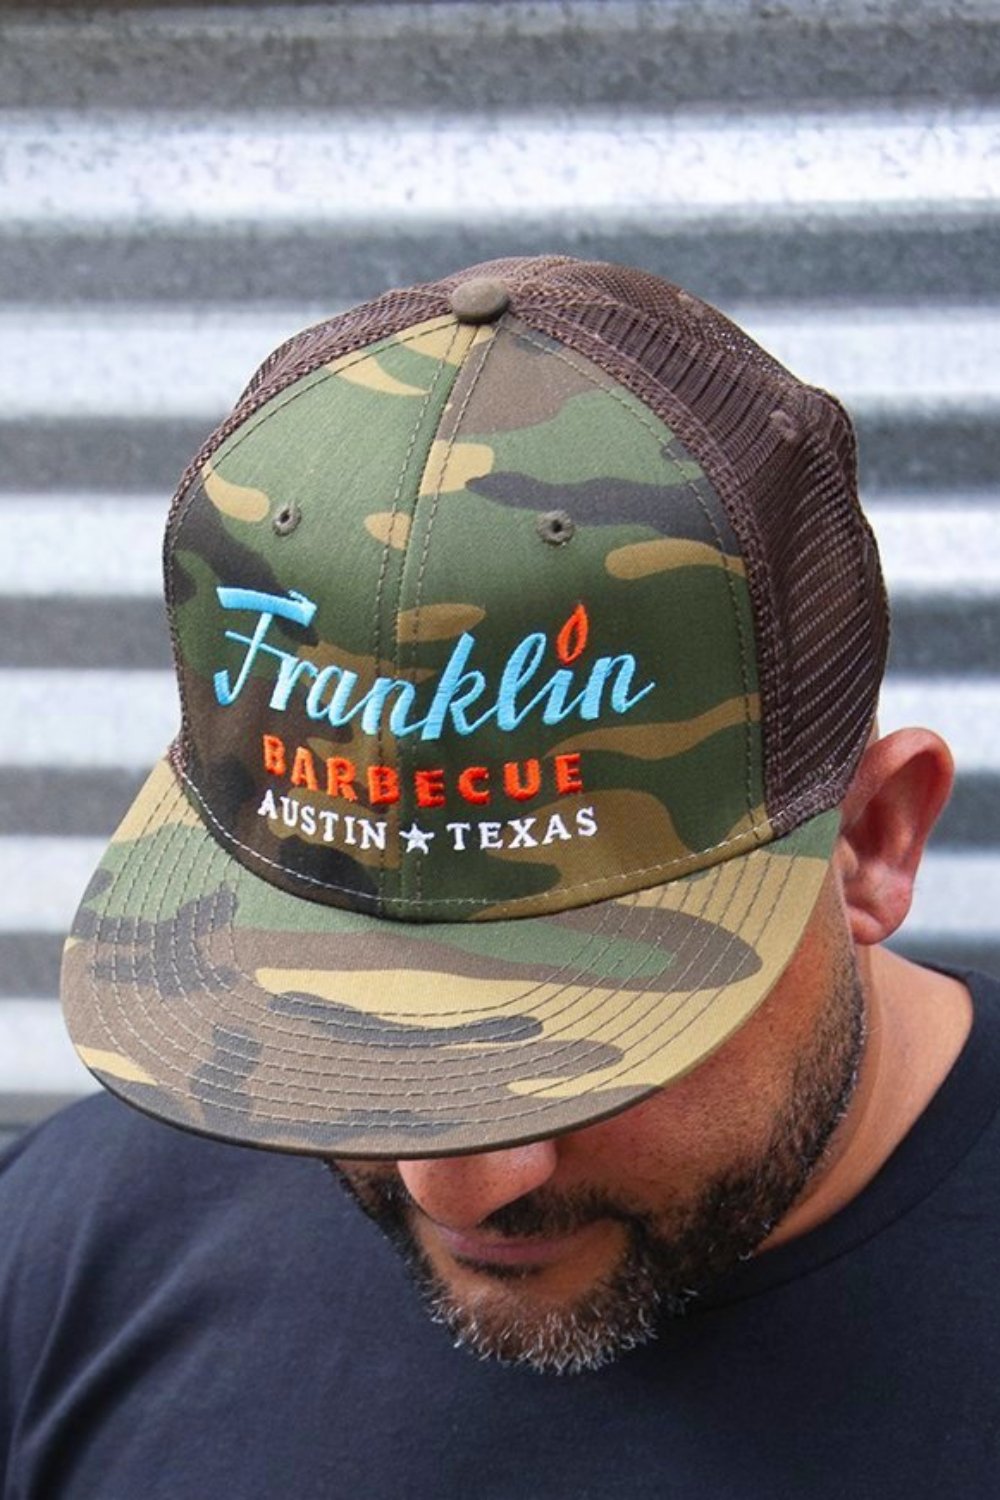 Person modeling Camouflage cap with Franklin Barbecue text logo in blue and orange. Below that is Austin Texas in white.